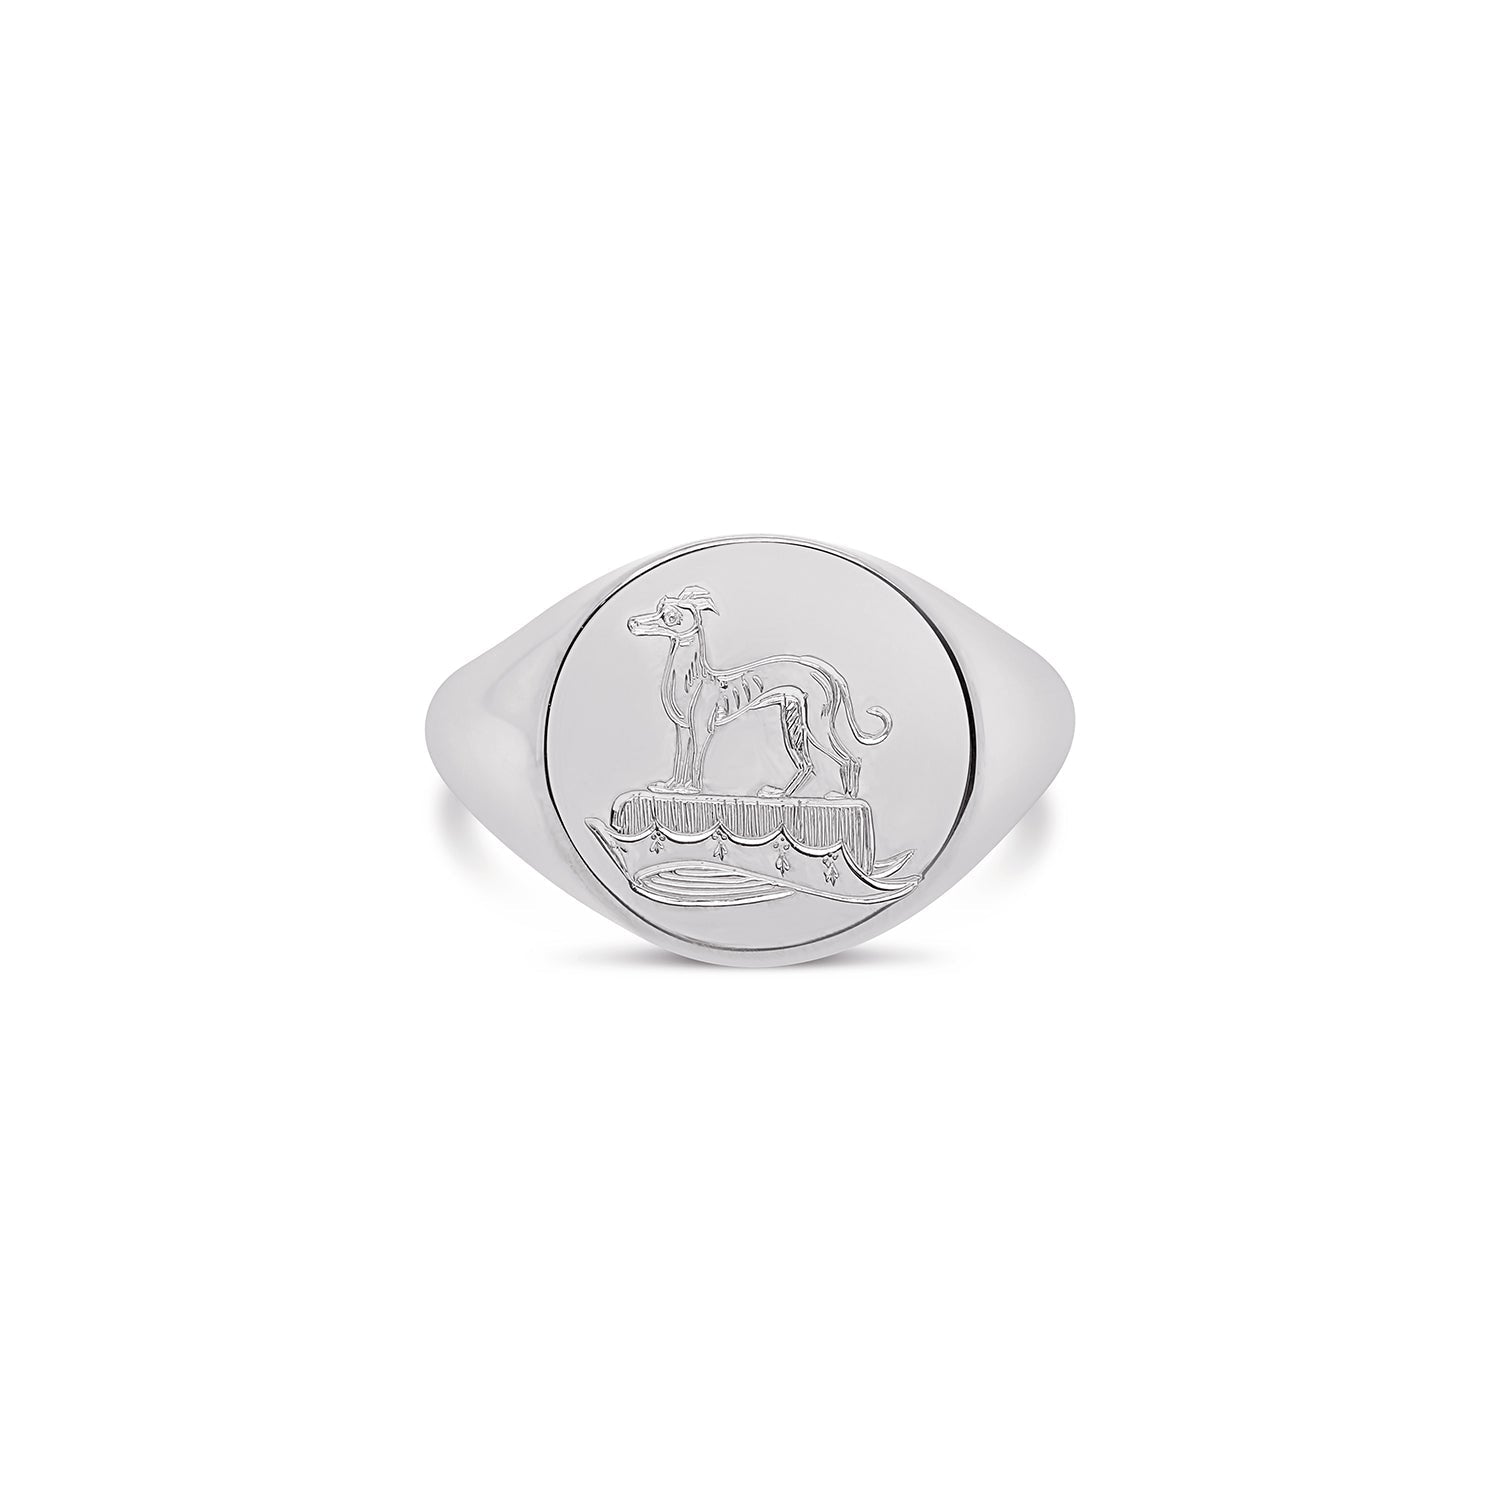 Classic Round White Gold Signet Ring